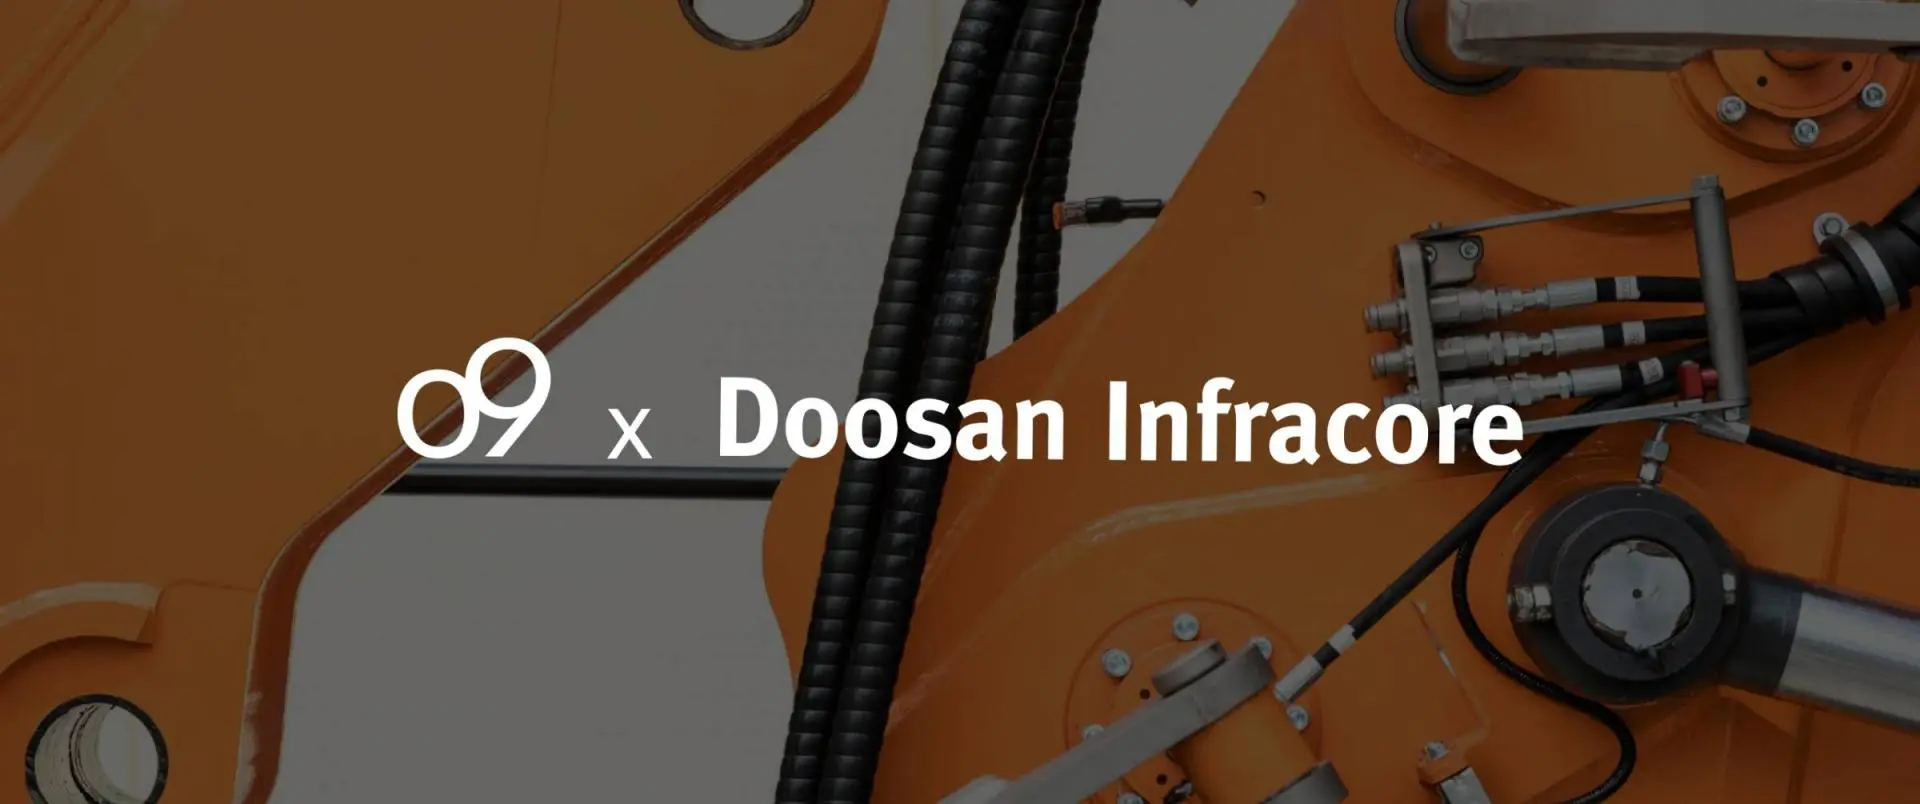 Doosan Infracore selects o9 Solutions as Integrated Business Planning partner